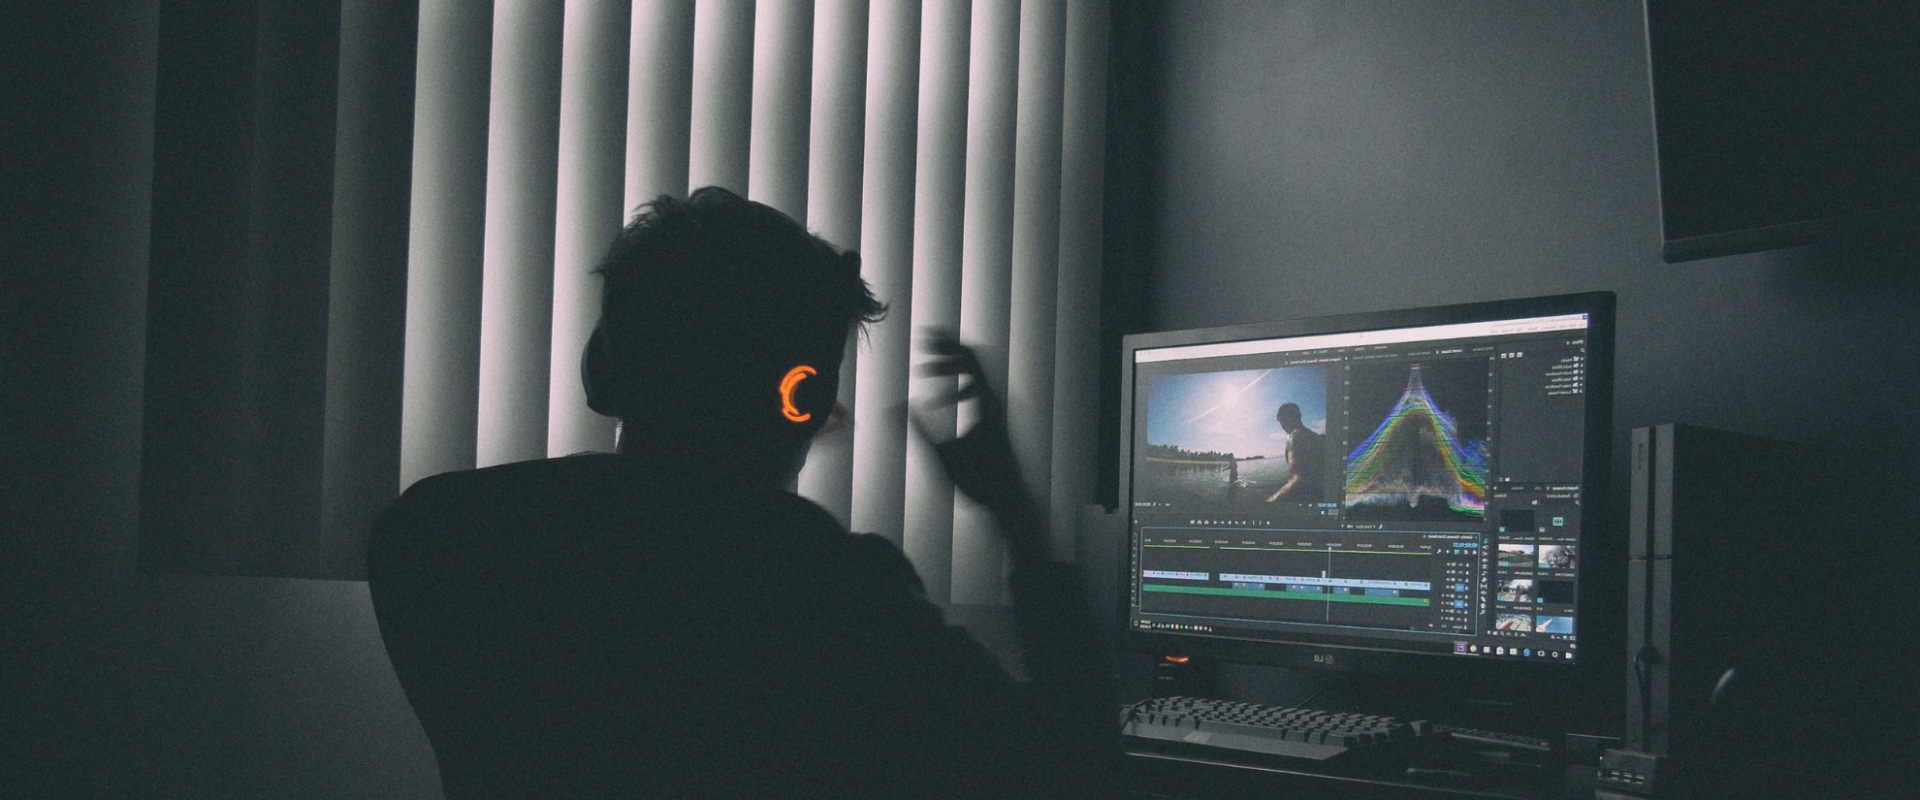 Common Mistakes to Avoid When Editing a Video